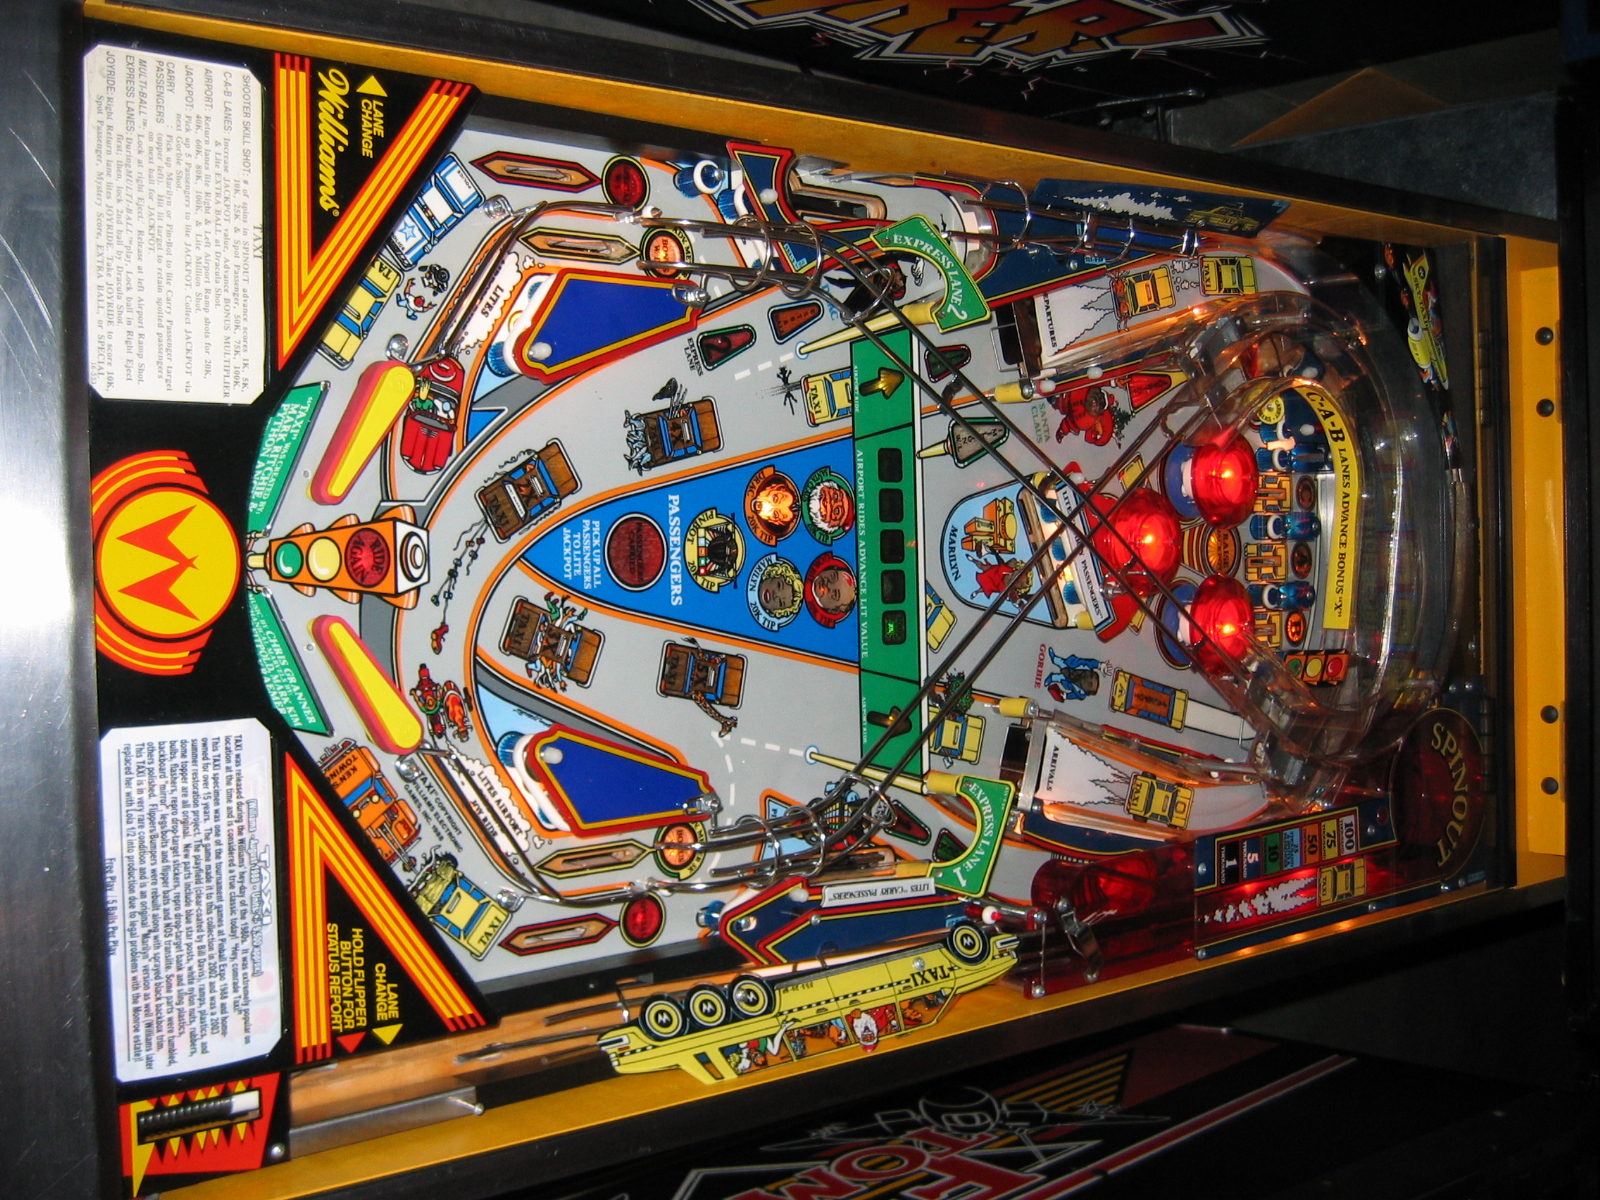 Taxi (Williams, 1988) Playfield